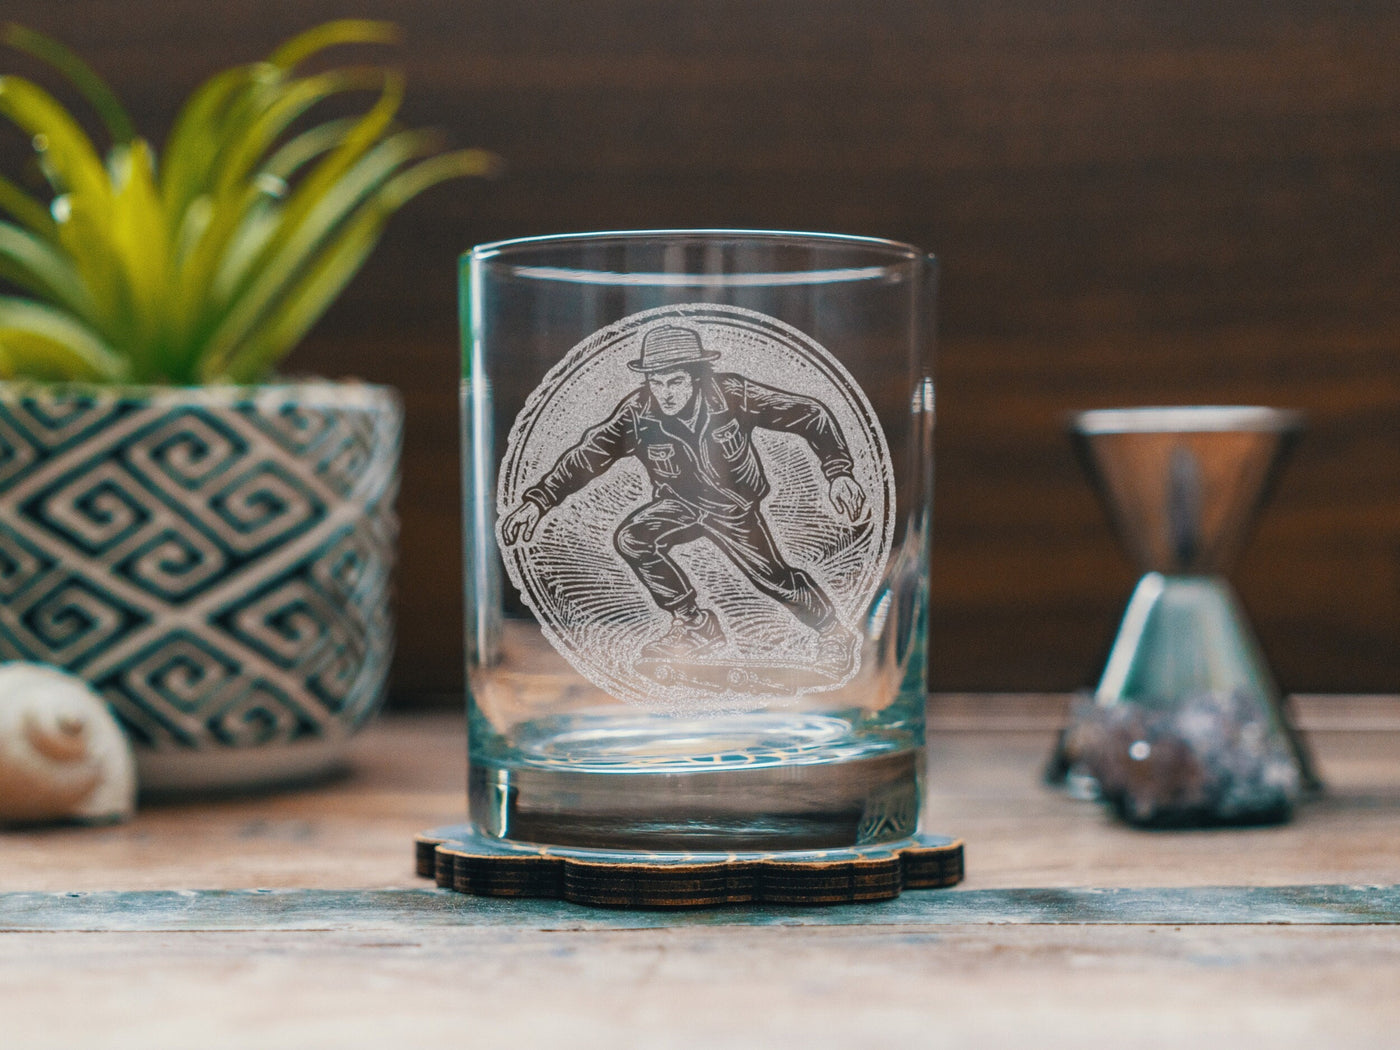 Skateboarder Glasses | Personalized etched beer, whiskey, wine & cocktail glassware. Skater Culture, Street Lifestyle gift, Summer Vibes.